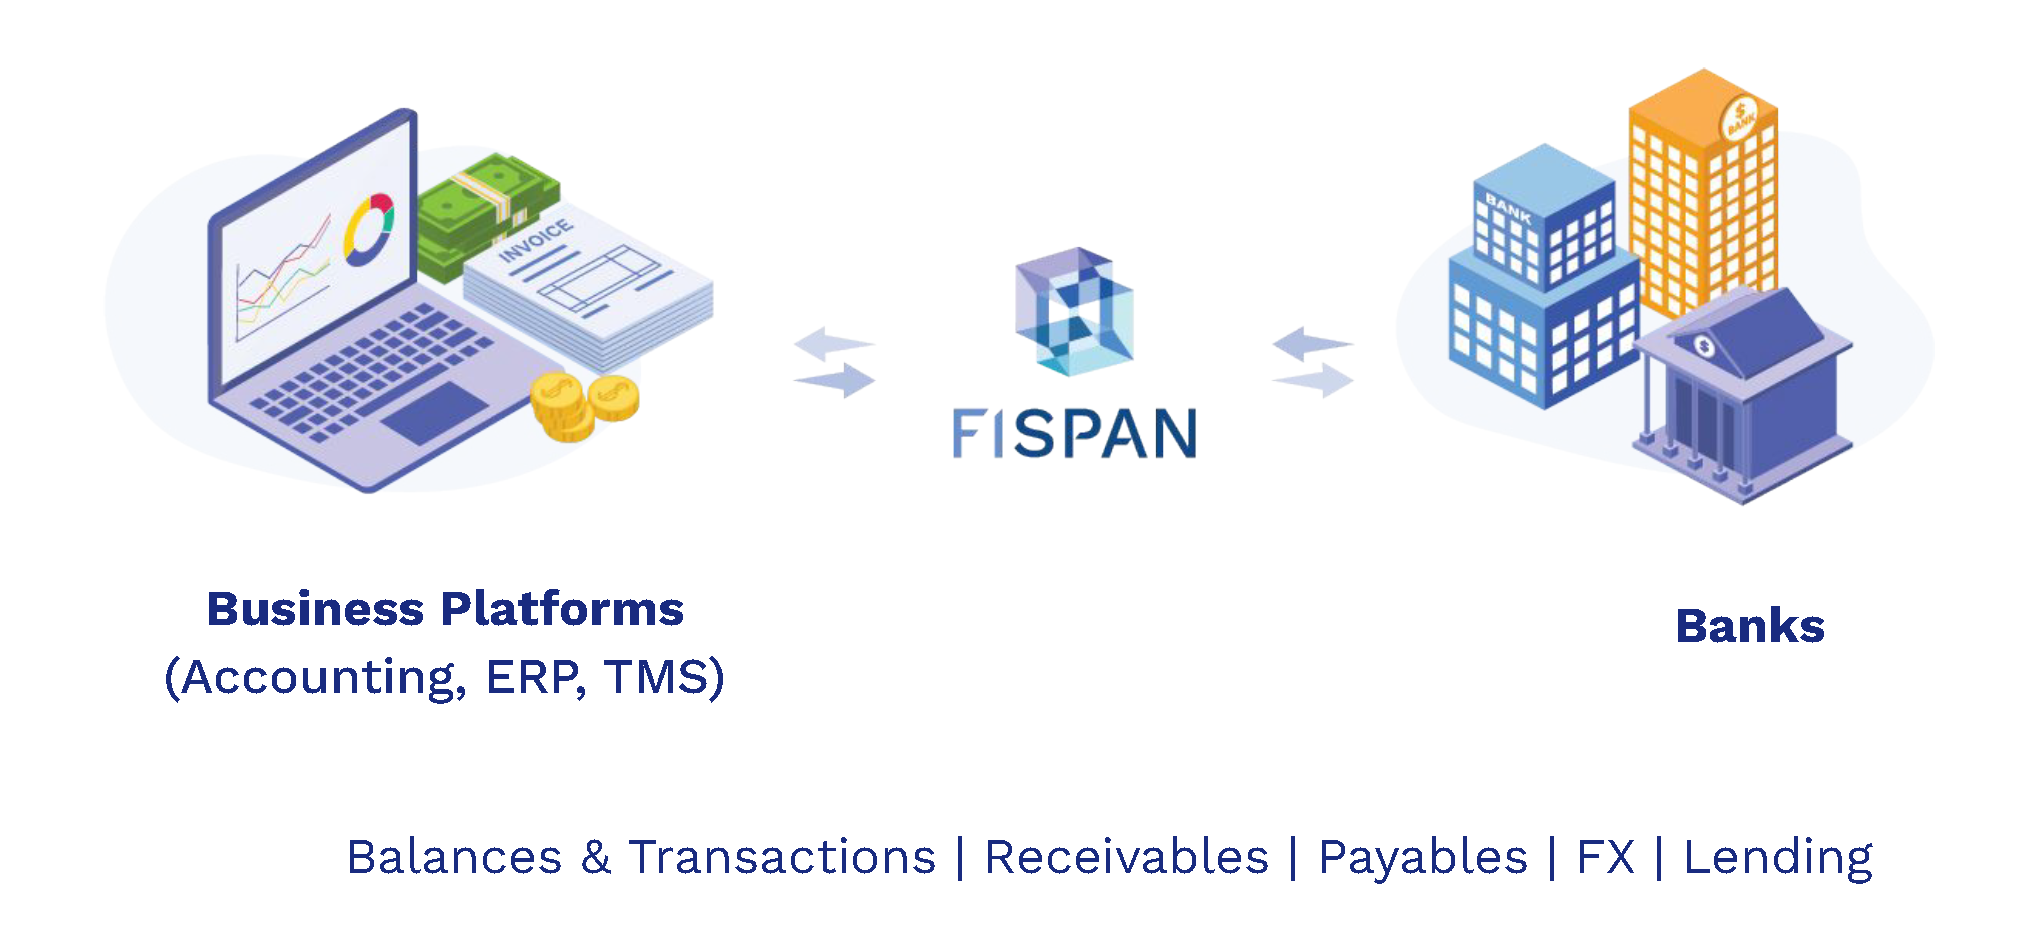 FISPAN platform is a powerful many-to-many bridge between the Client and Bank Domains. FISPAN supports two-way connectivity between business platforms and banks, enabling balances and transactions, receivables, payables and lending. 